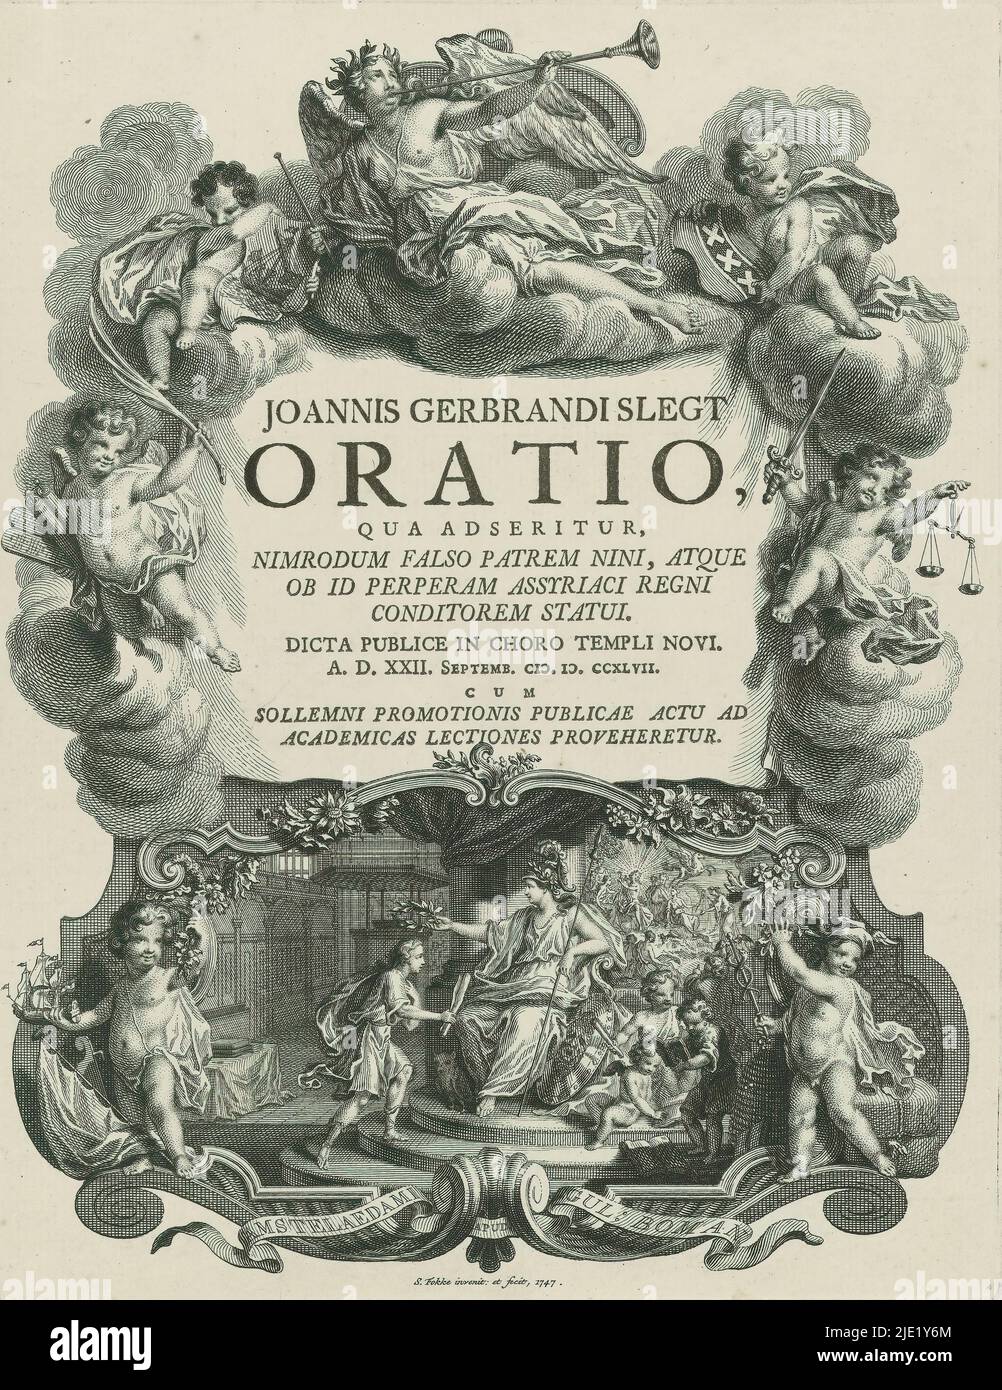 Minerva lauds a young man with bull, Title page for: J.G. Slegt, Oratio, qua adseritur, Nimrodum falso patrem Nini (...), 1747, Within a cartouche the effigy of Minerva lauding a young man holding a bull. In the background left, a view of the interior of a church. Behind Minerva a depiction of Apollo, his muses and Pegasus. Above the cartouche is the title of the oration, all around are putti with symbols of the various faculties of the university. At the very top, an angel with laurel wreath blows the trumpet., print maker: Simon Fokke, (mentioned on object), after own design by: Simon Fokke, Stock Photo